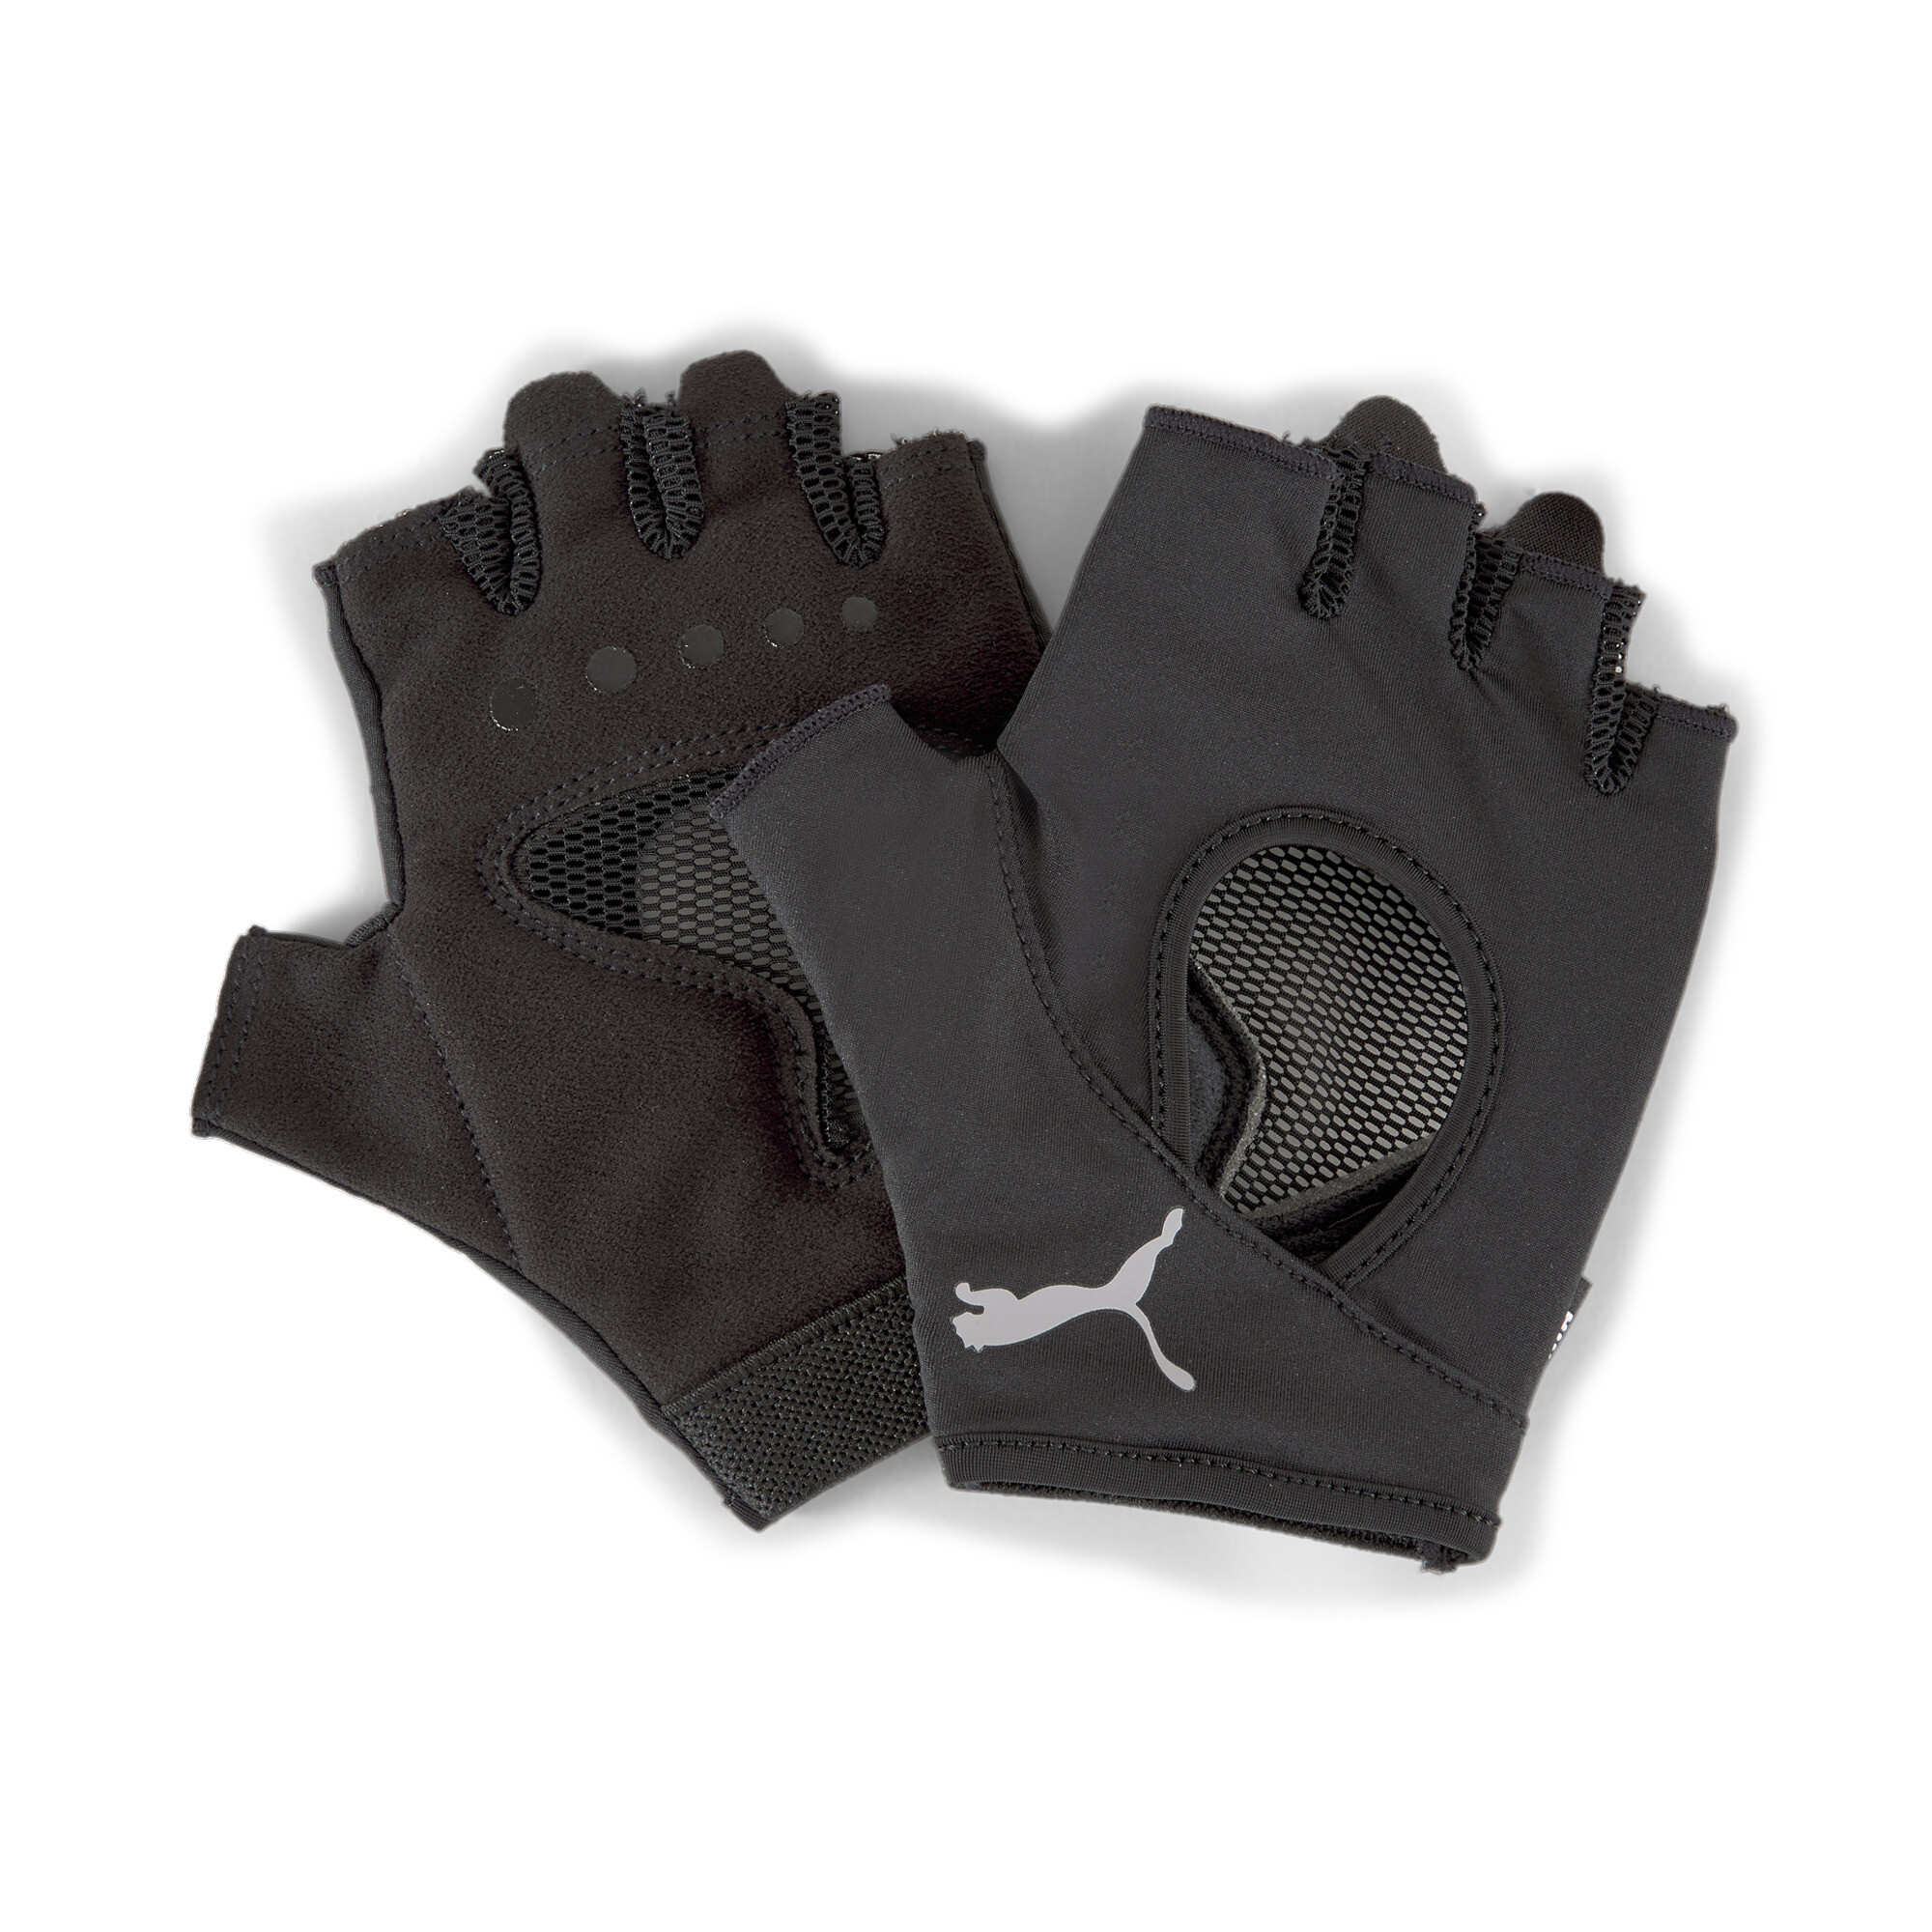 Women's PUMA Gym Training Gloves In Black, Size Small